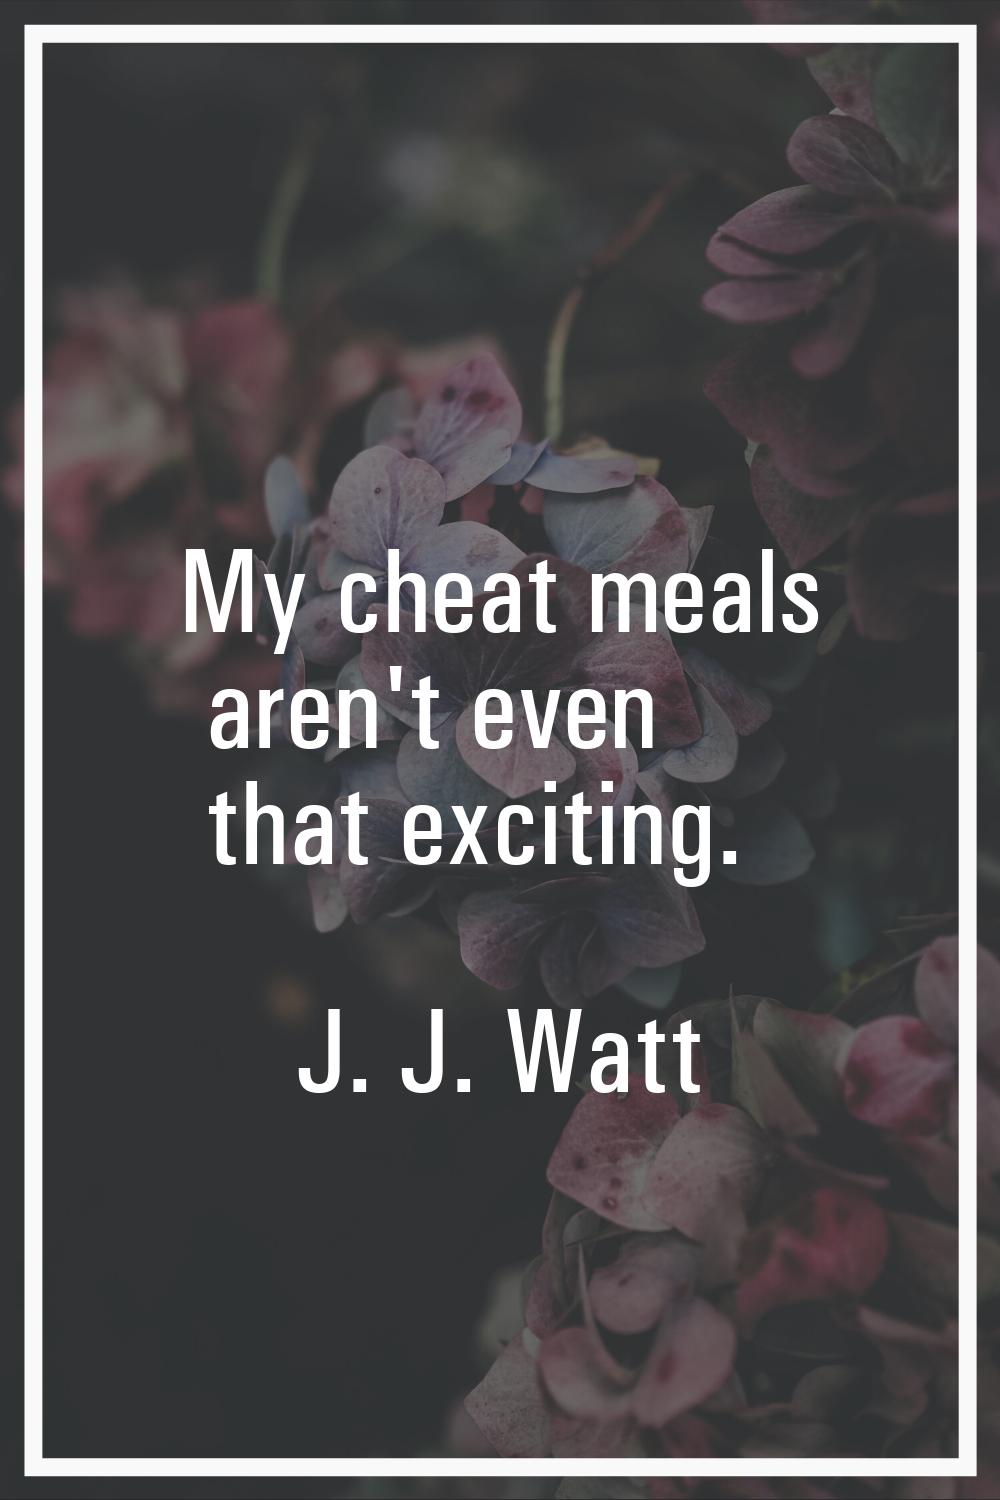 My cheat meals aren't even that exciting.